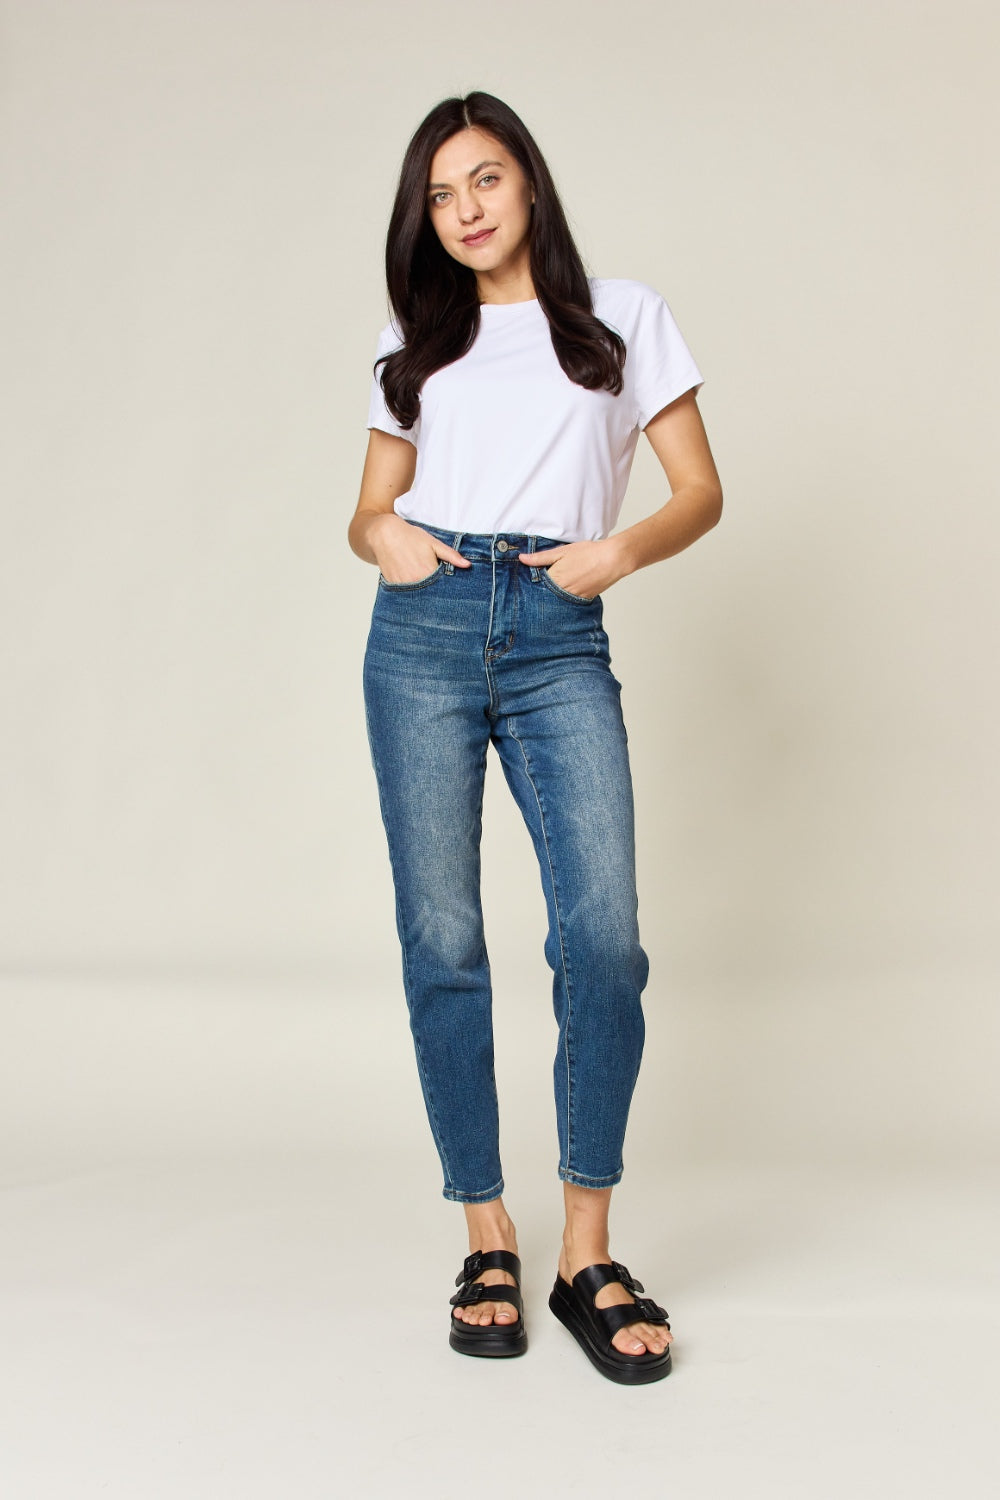 ONLINE ONLY! Judy Blue Full Size Tummy Control High Waist Slim Jeans